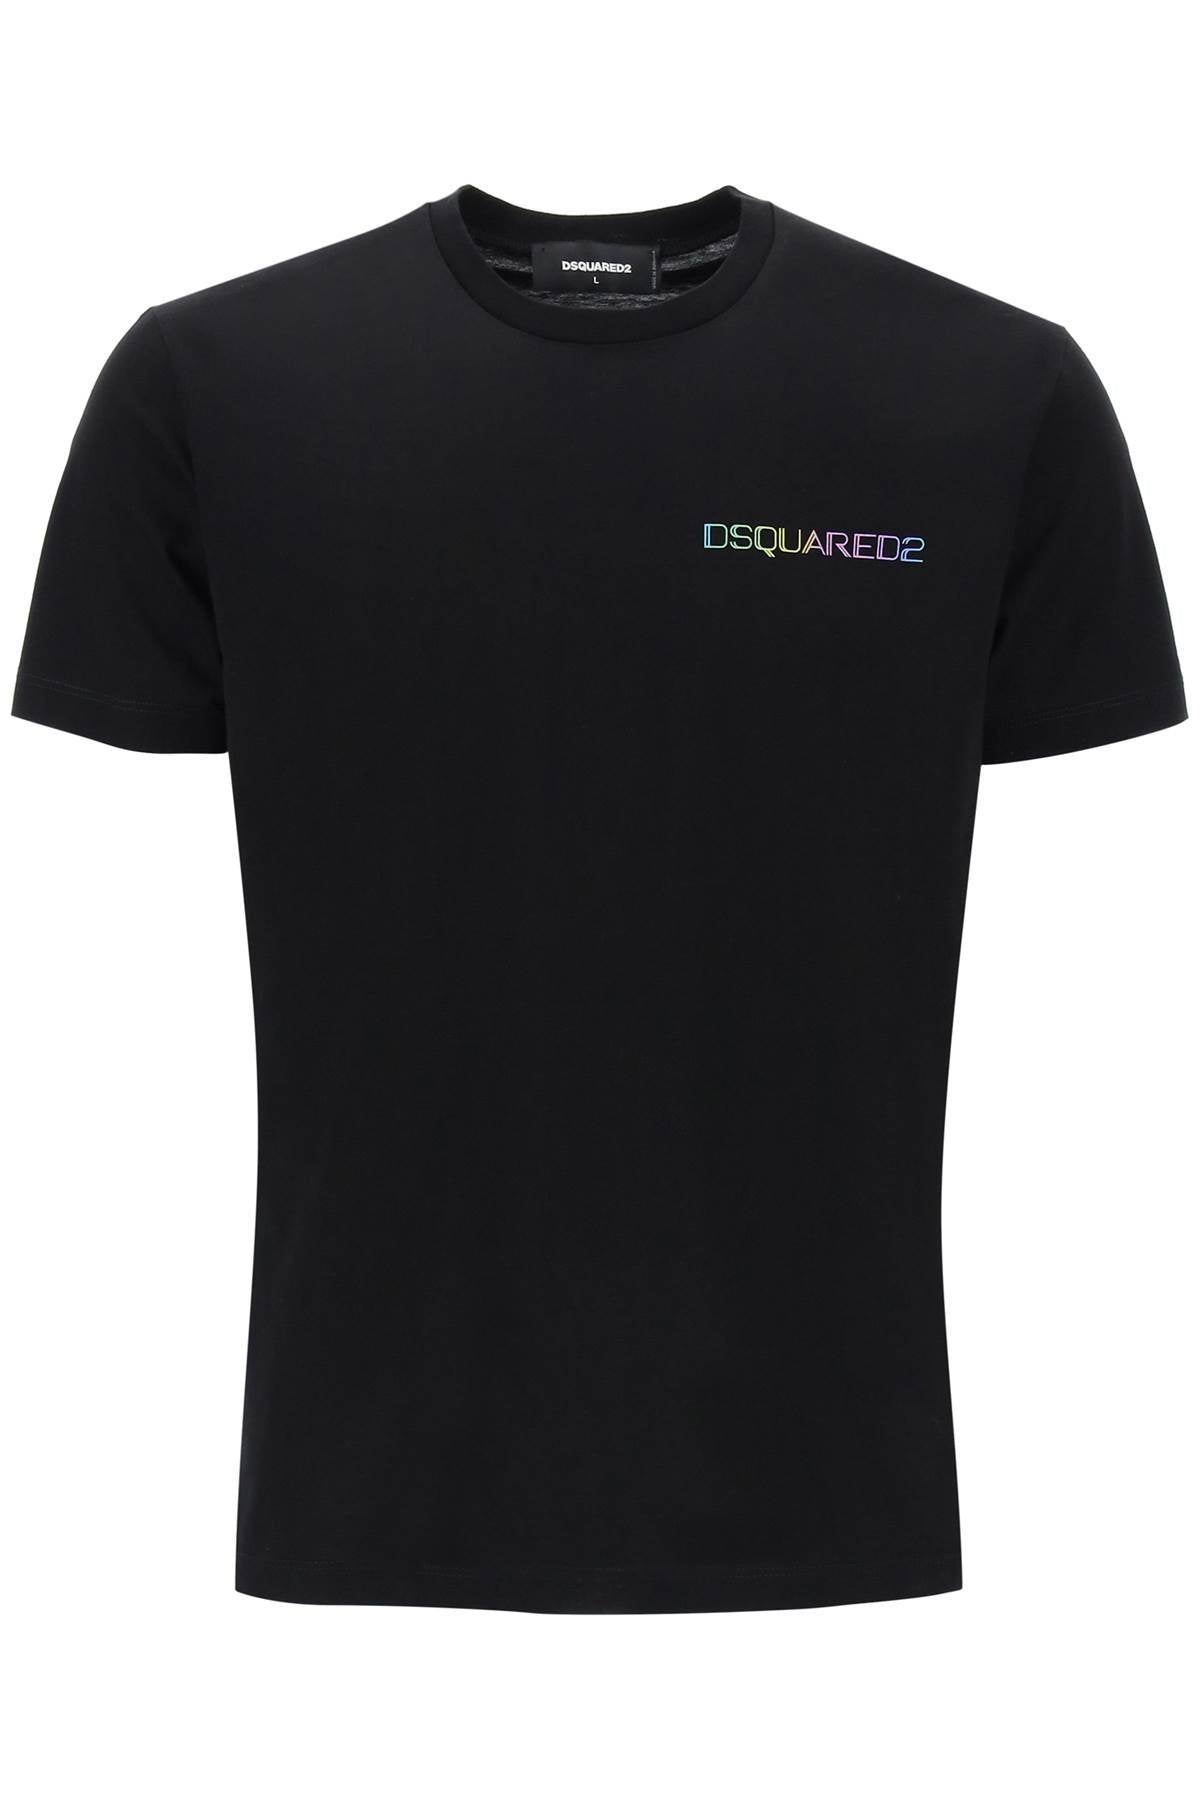 Dsquared2 printed cool fit t-shirt-0